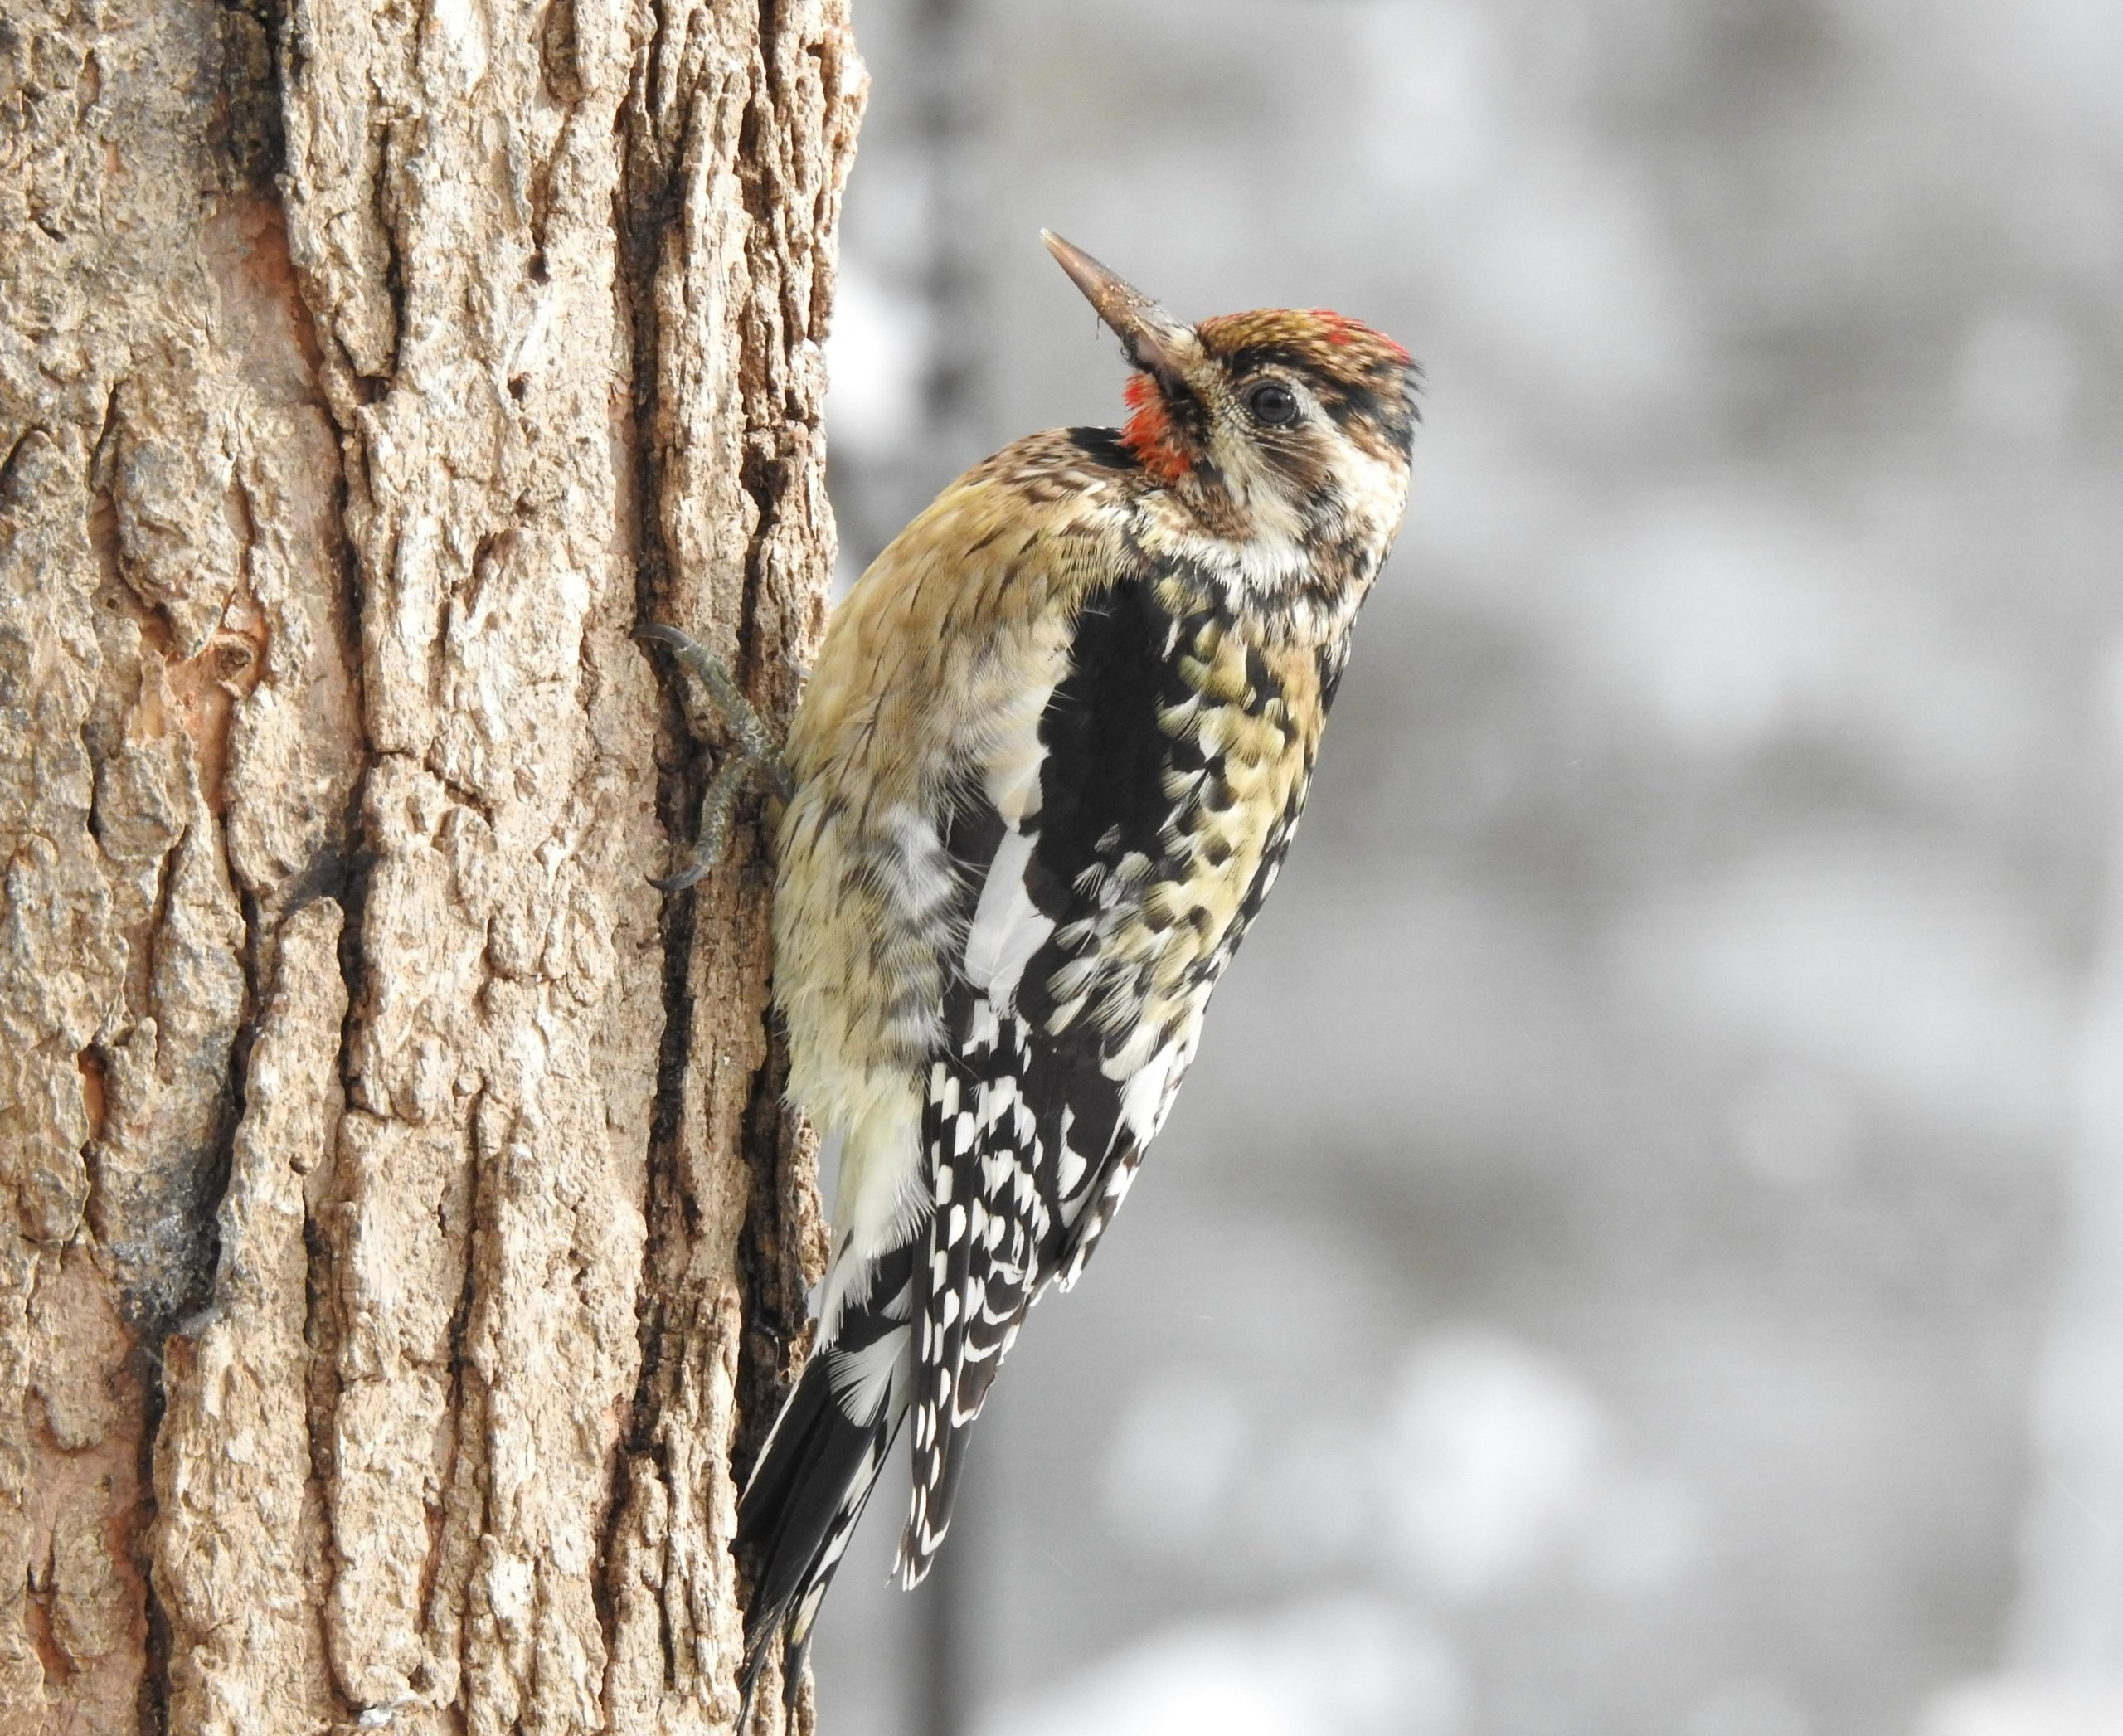 Yellow-Bellied Sapsucker: A Woodpecker by Another Name